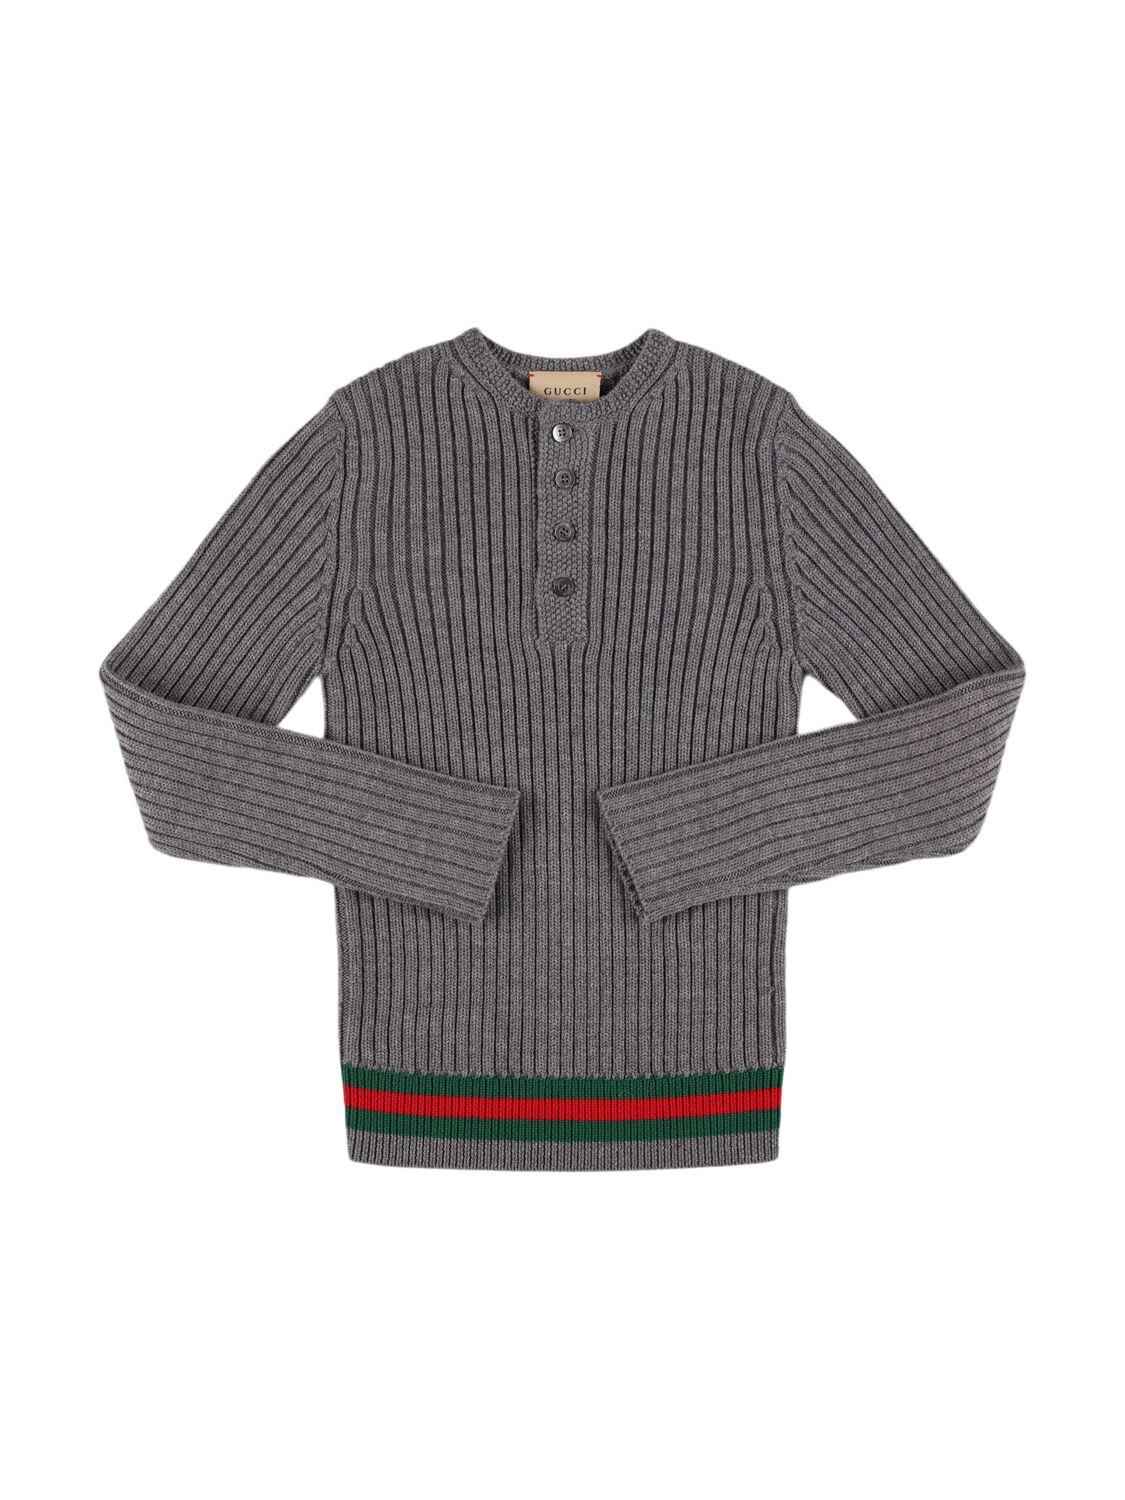 Gucci Wool Knit Long Sleeved Top W/web In Gray